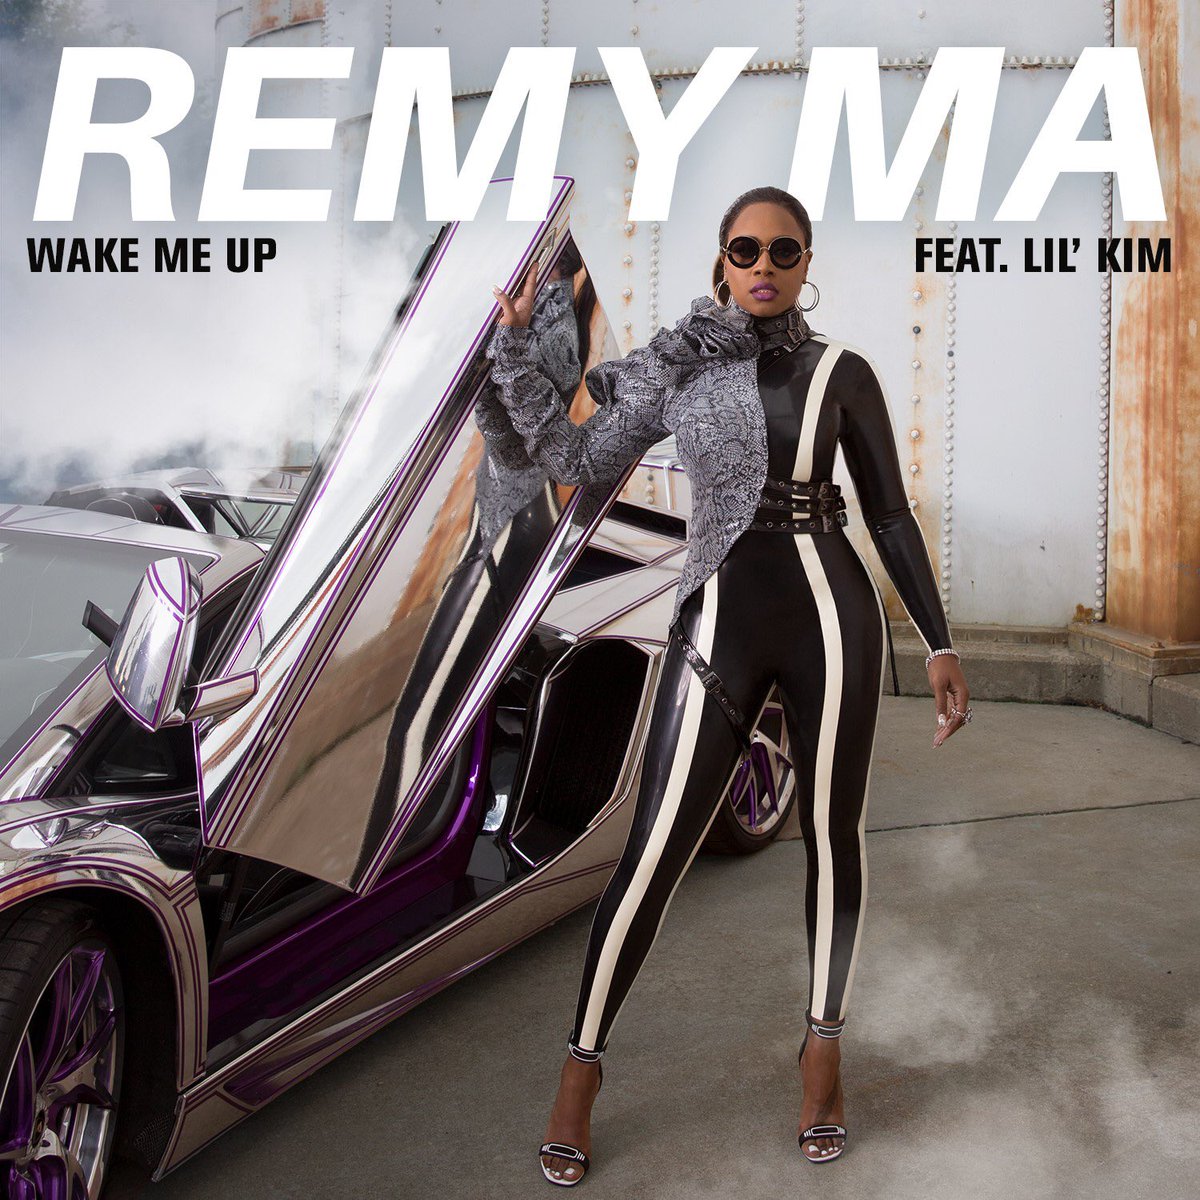 New ???????????? from @RealRemyMa ft. @LilKim #WakeMeUp out now!! Make sure ya’ll check that out!! 
https://t.co/76lXJpN18E https://t.co/mf1YEMyyEv